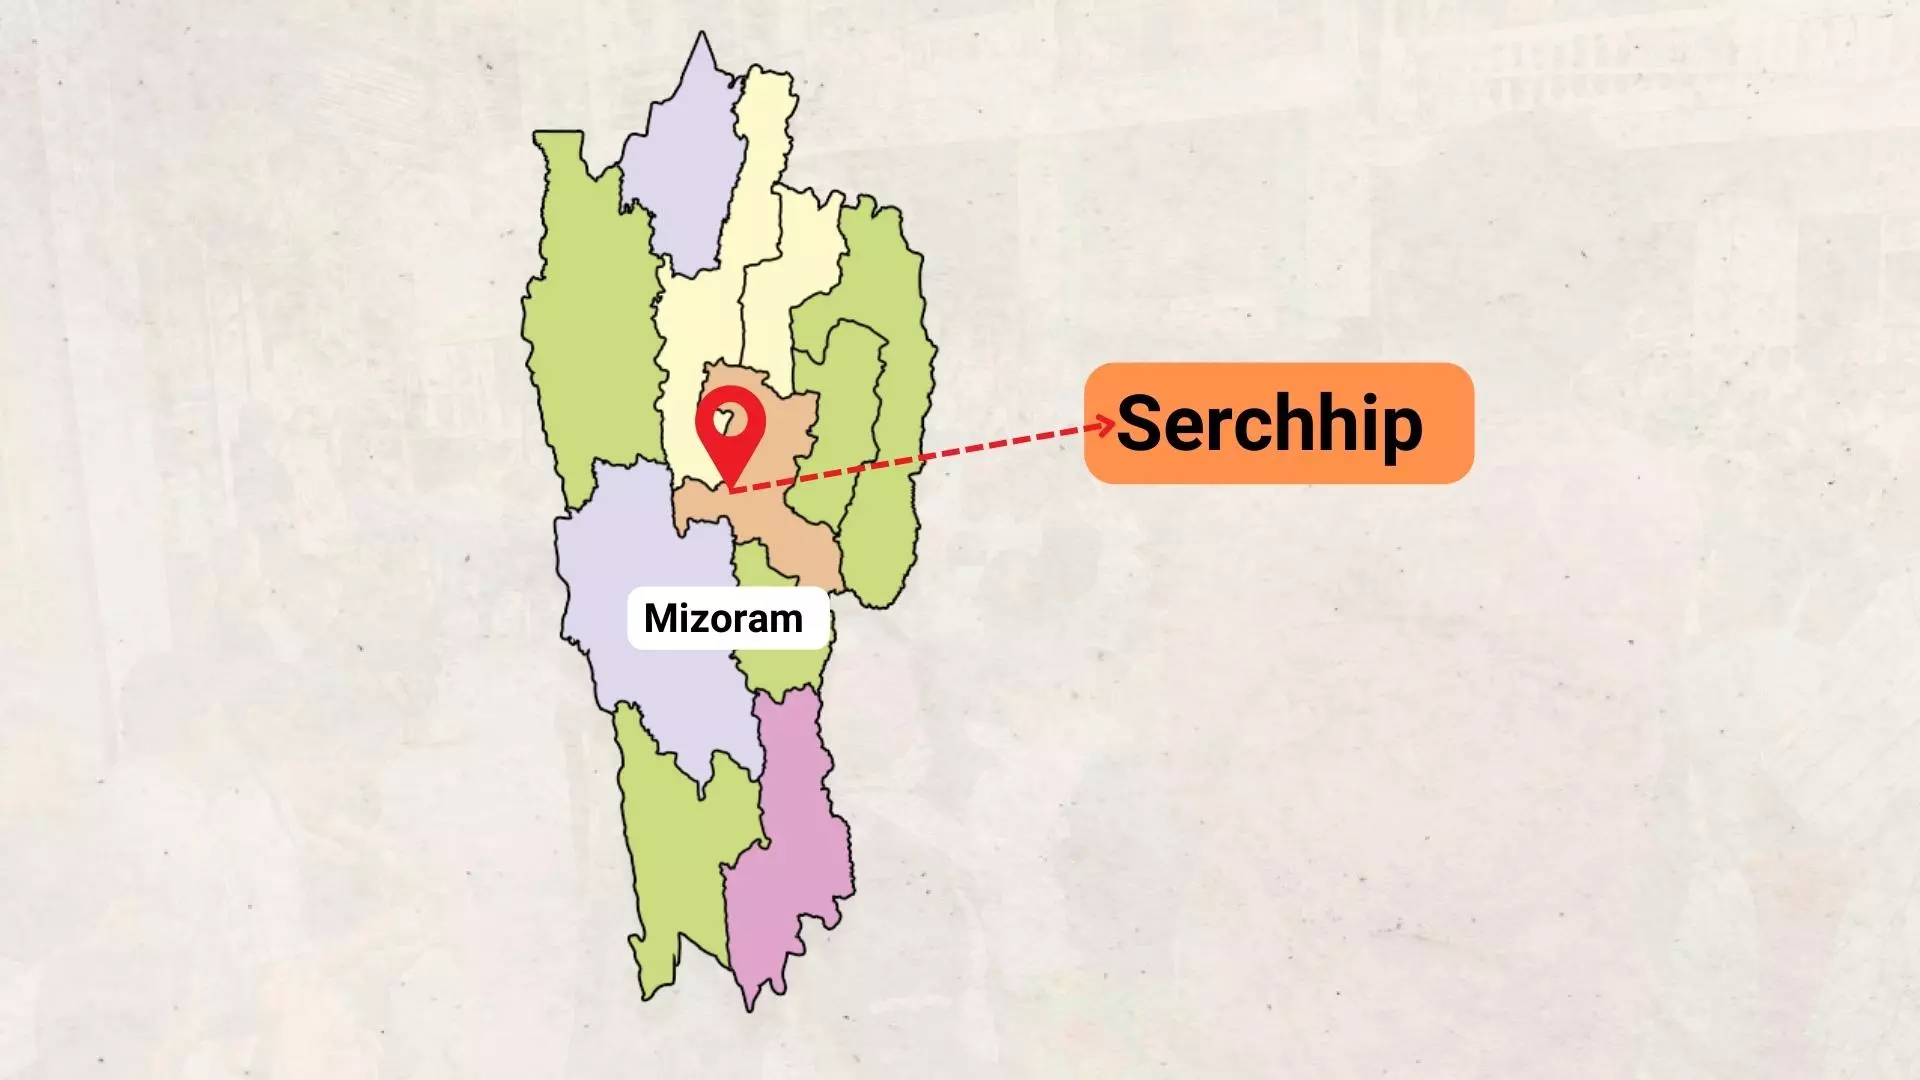 Serchhip is democratically vibrant a fact reflected in how it had elected former chief minister Lal Thanhawla several times until handing him down a career-shattering defeat in 2018.